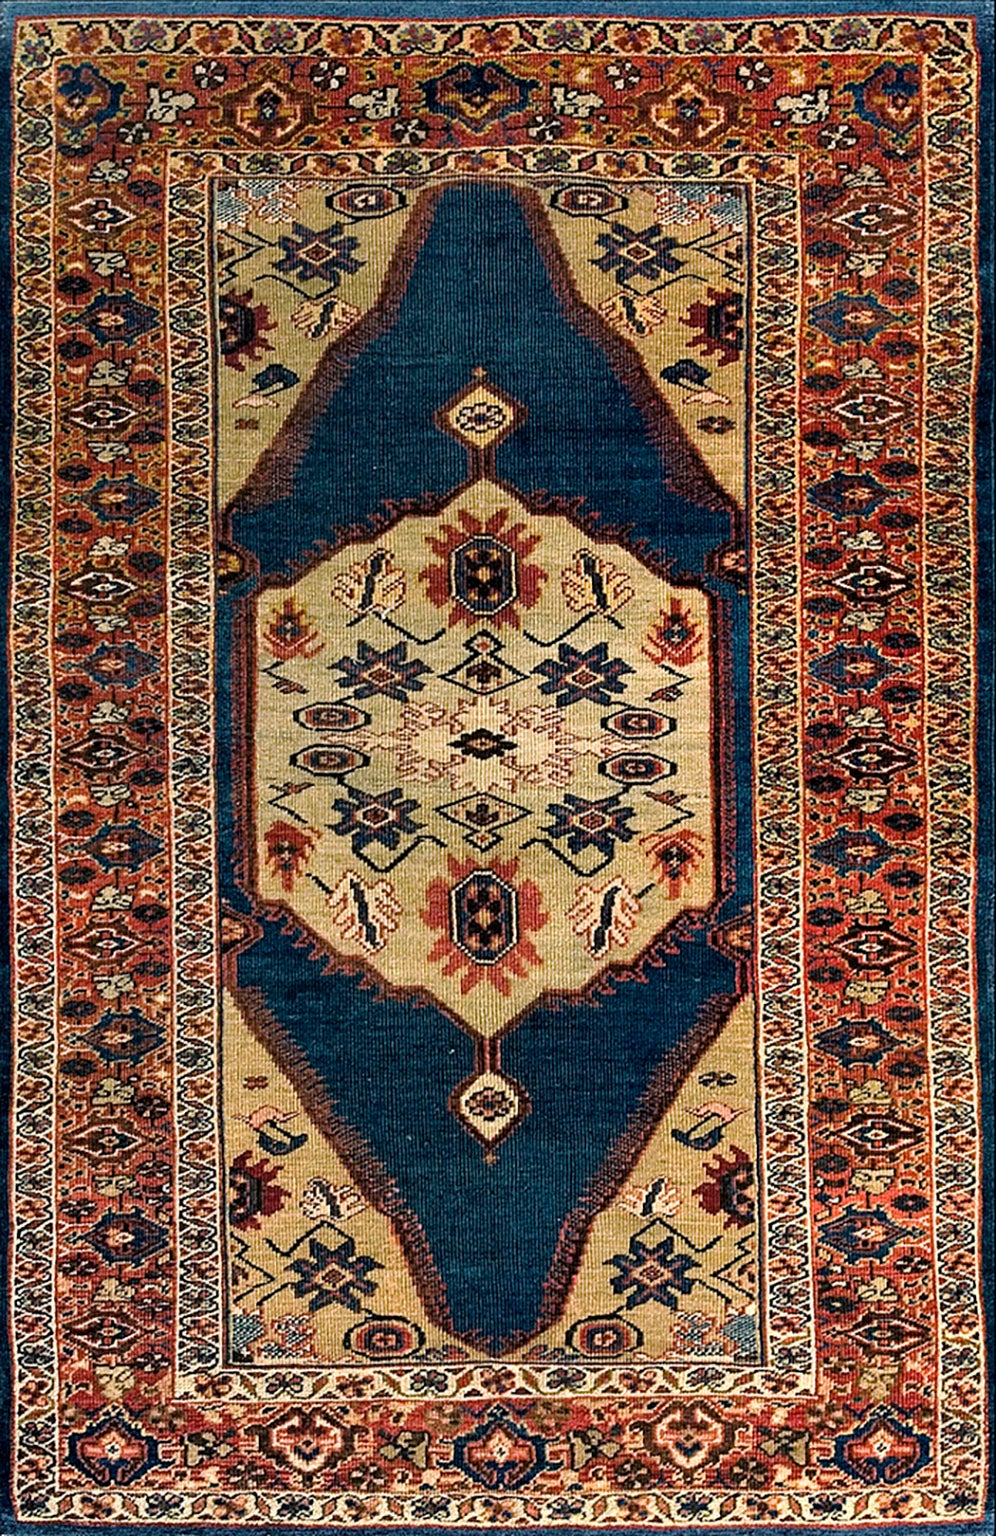 19th Century Persian Sultanabad Carpet ( 4'5" x 6'9" - 135 x 206 ) For Sale